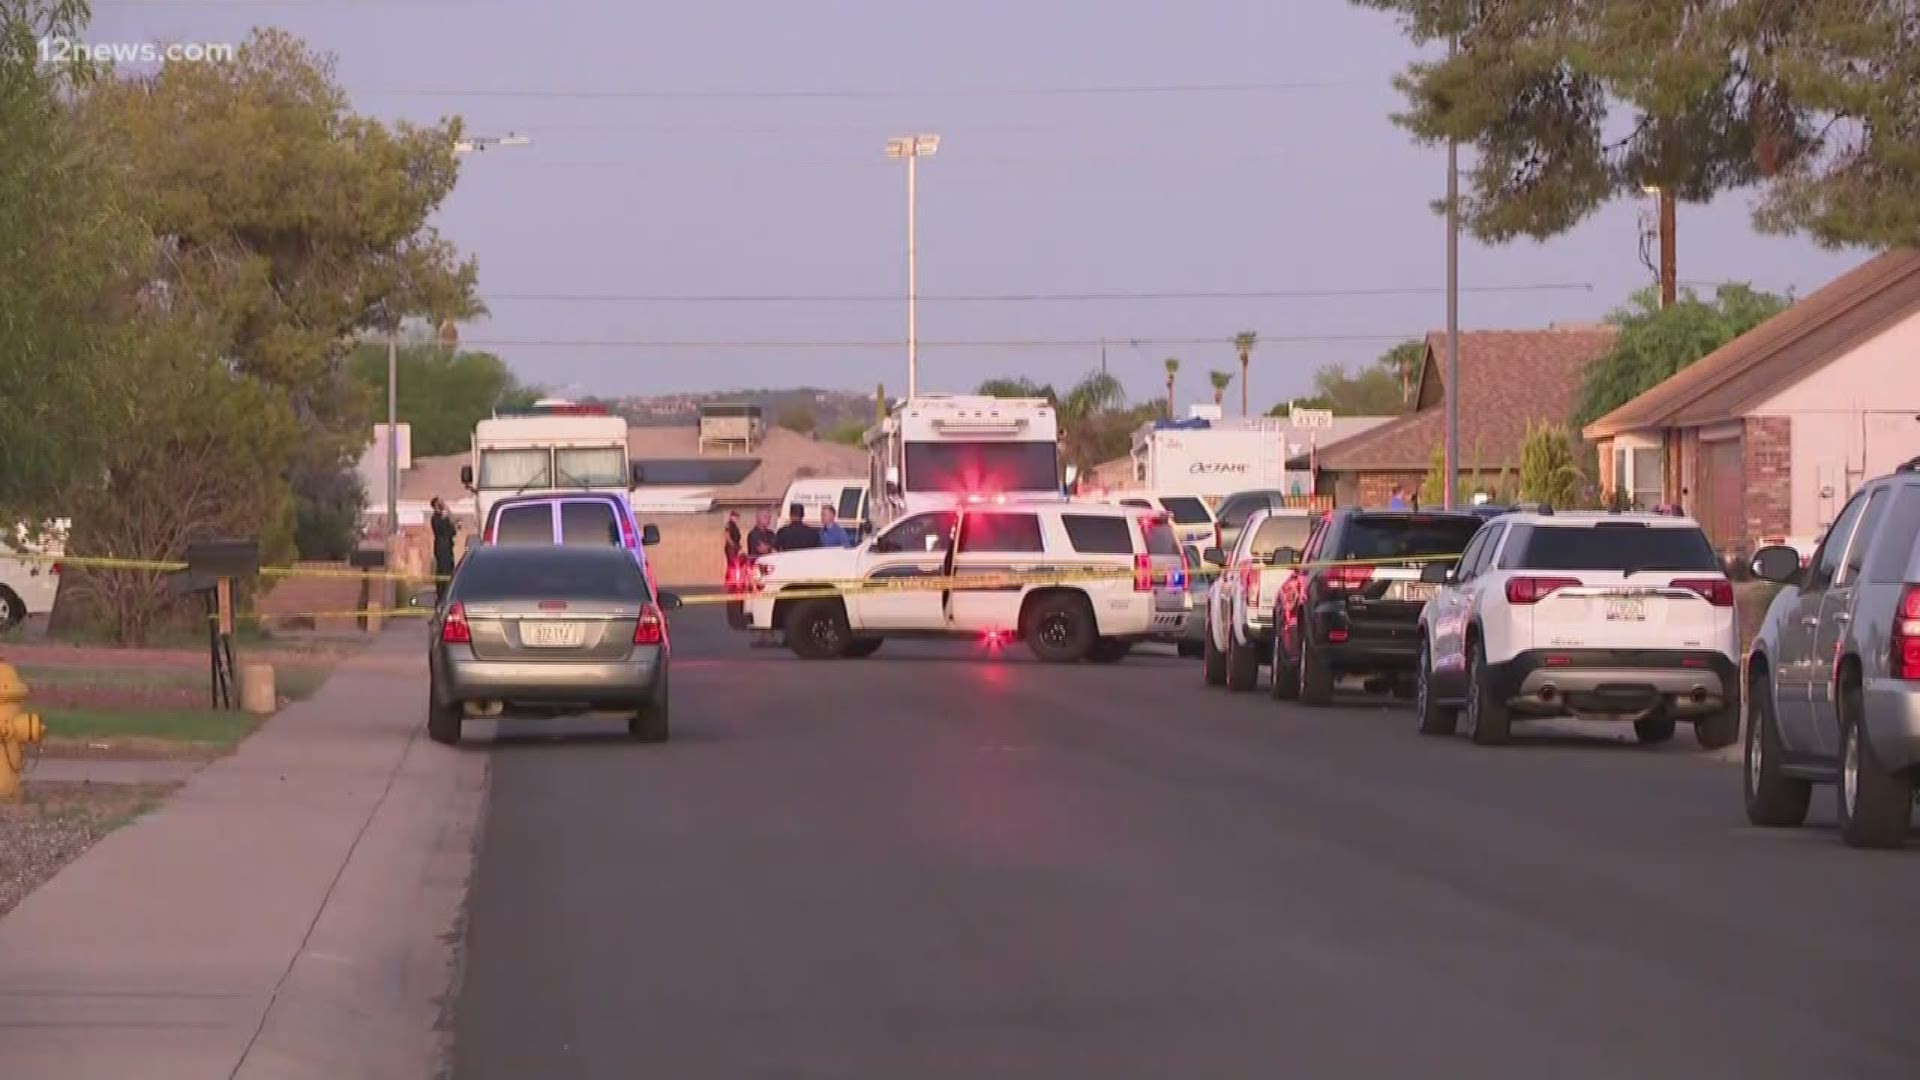 A suspect has died and no officers are injured after a shooting involving Phoenix police near 43rd Avenue and Thunderbird Road, according to police.